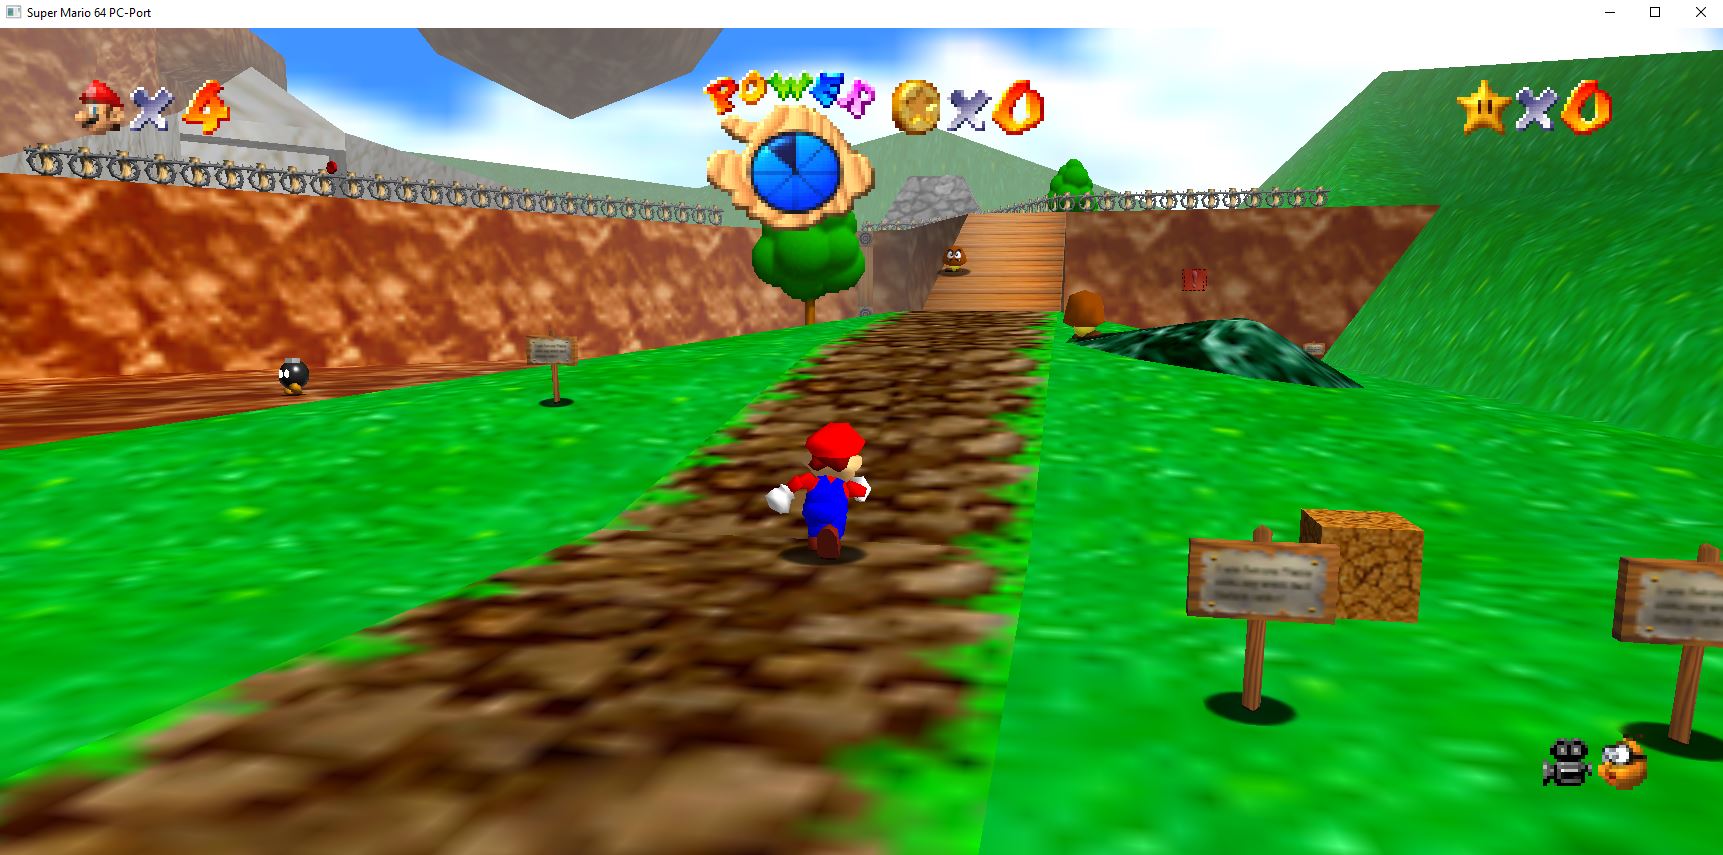 A fully functioning Mario 64 PC port has been released | VGC